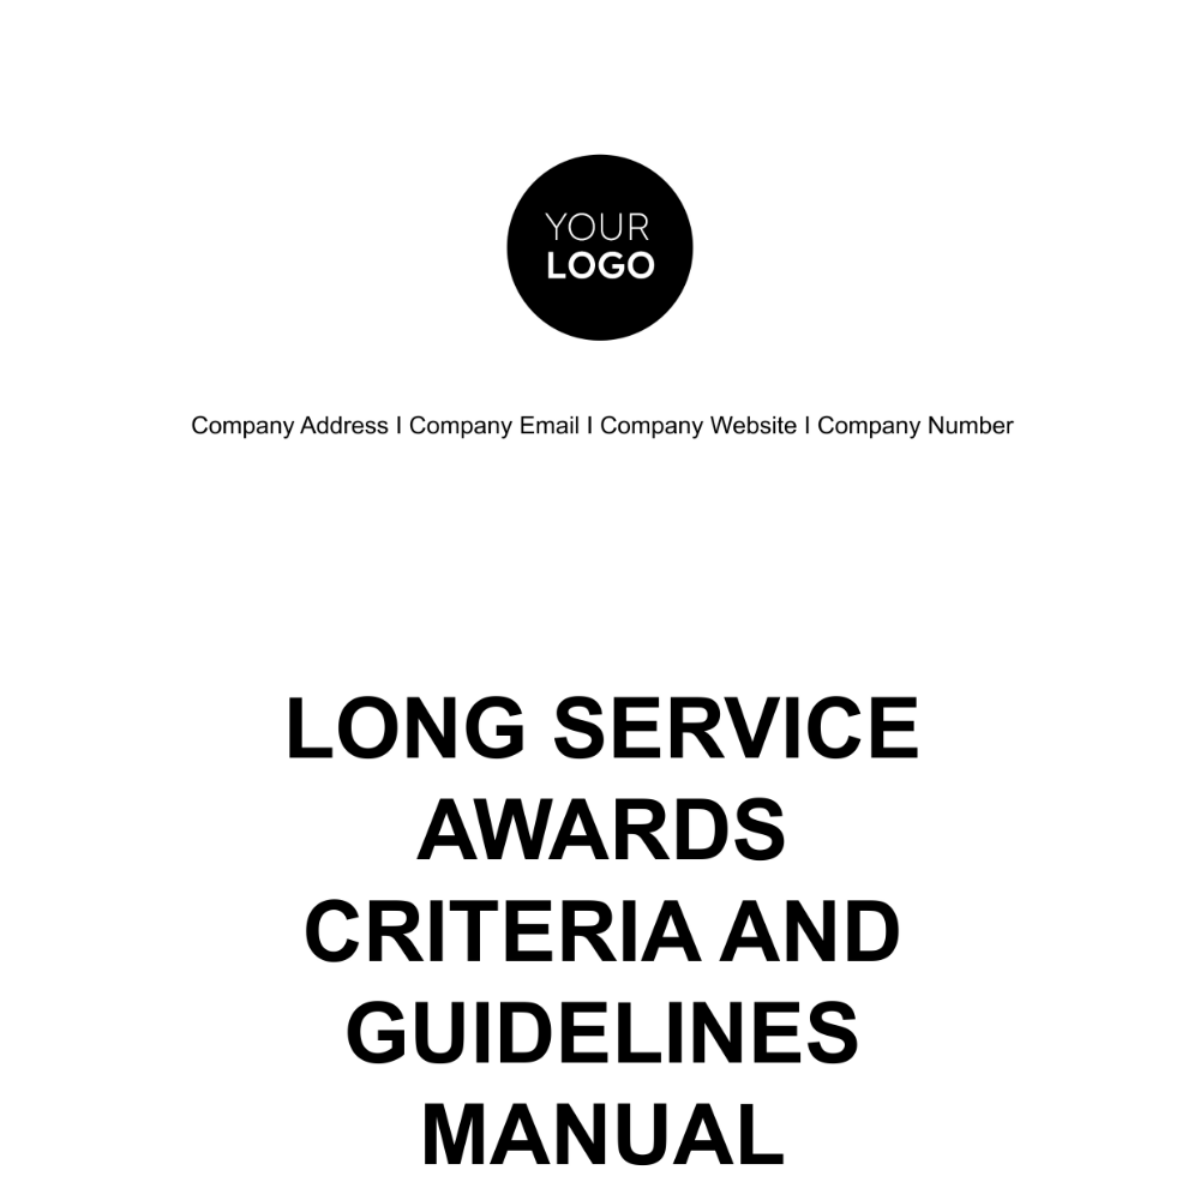 Long Service Awards Criteria and Guidelines Manual HR Template